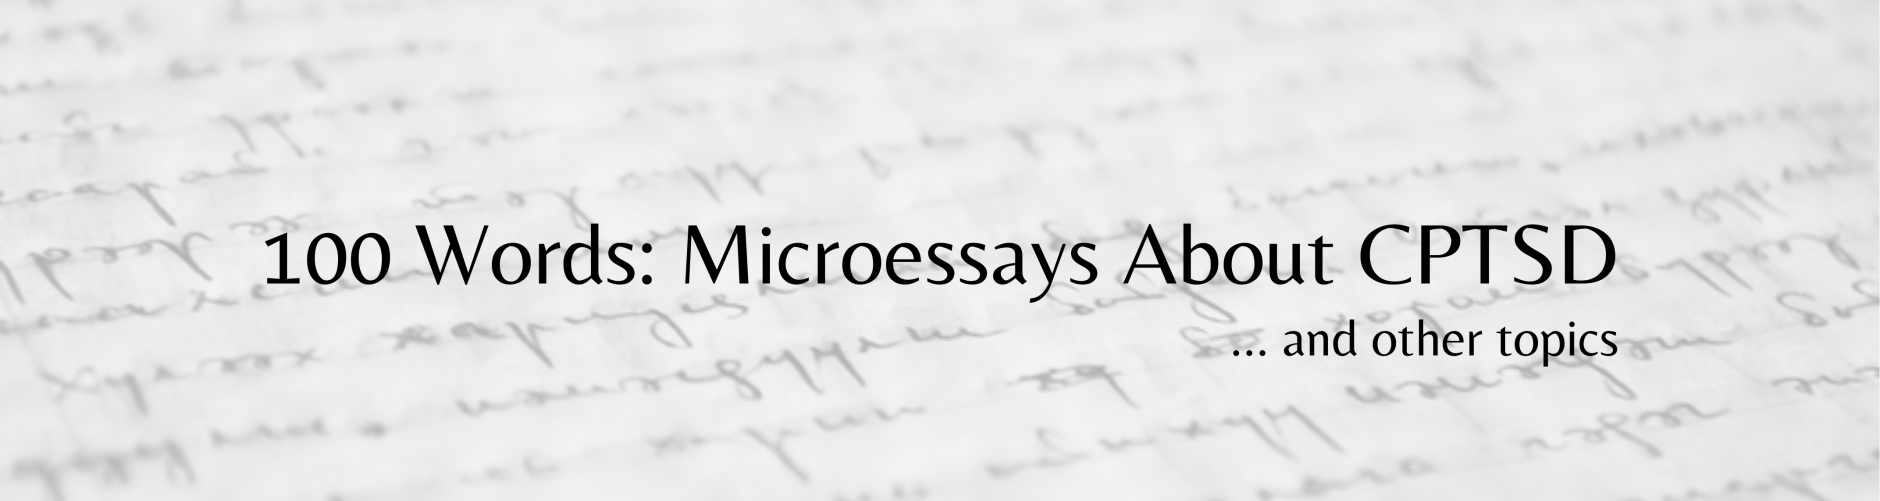 100 Words: Microessays About CPTSD